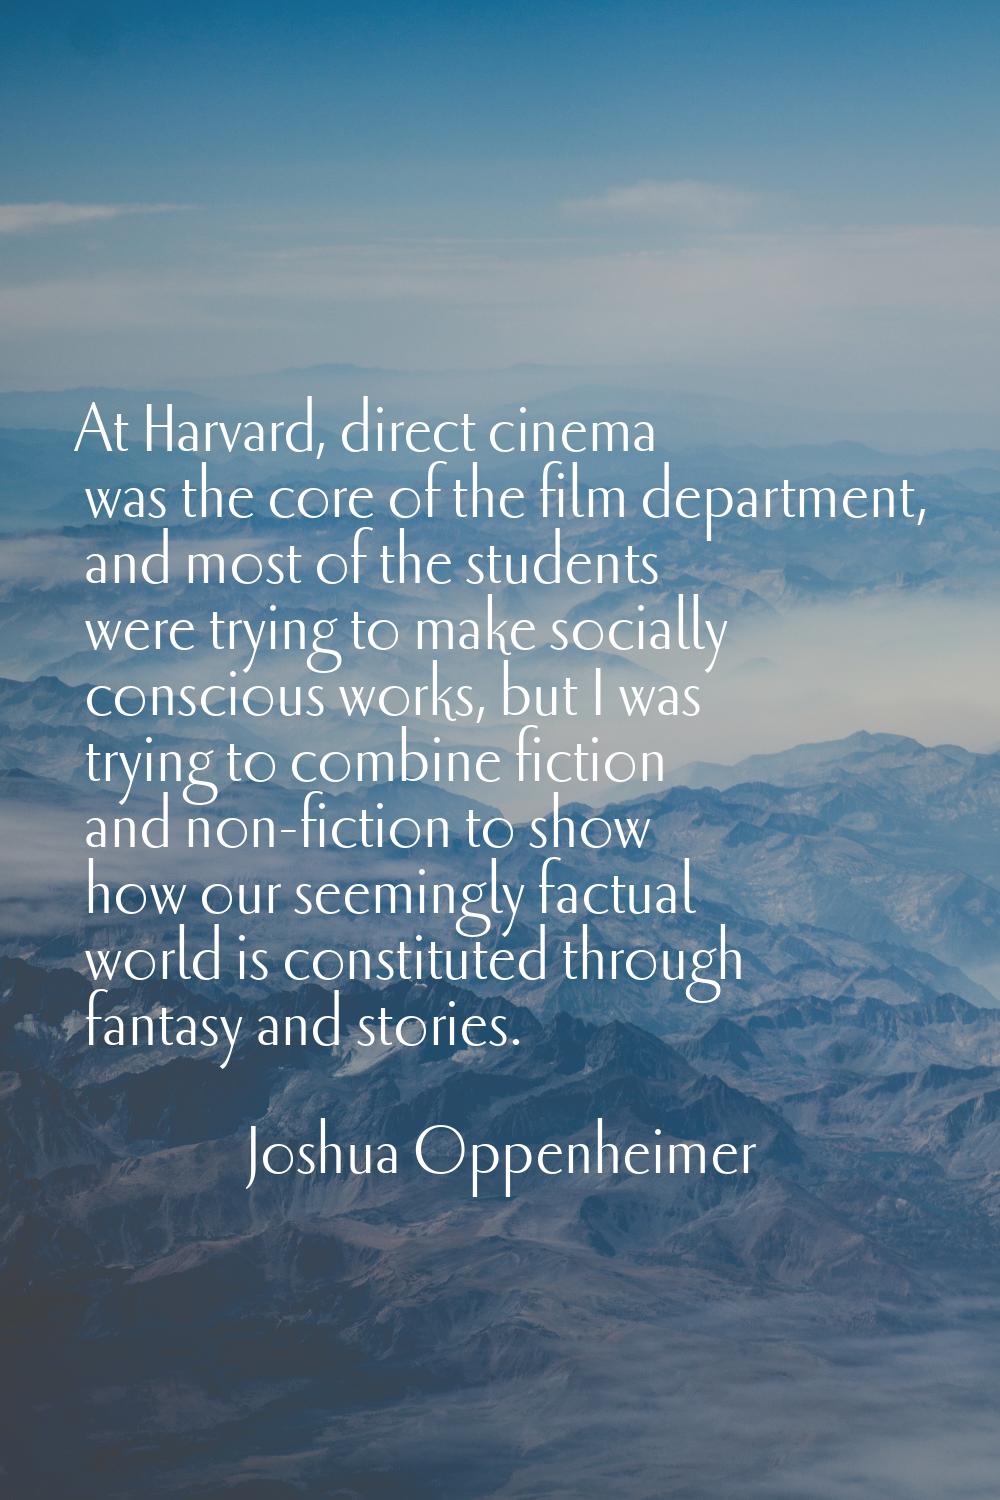 At Harvard, direct cinema was the core of the film department, and most of the students were trying